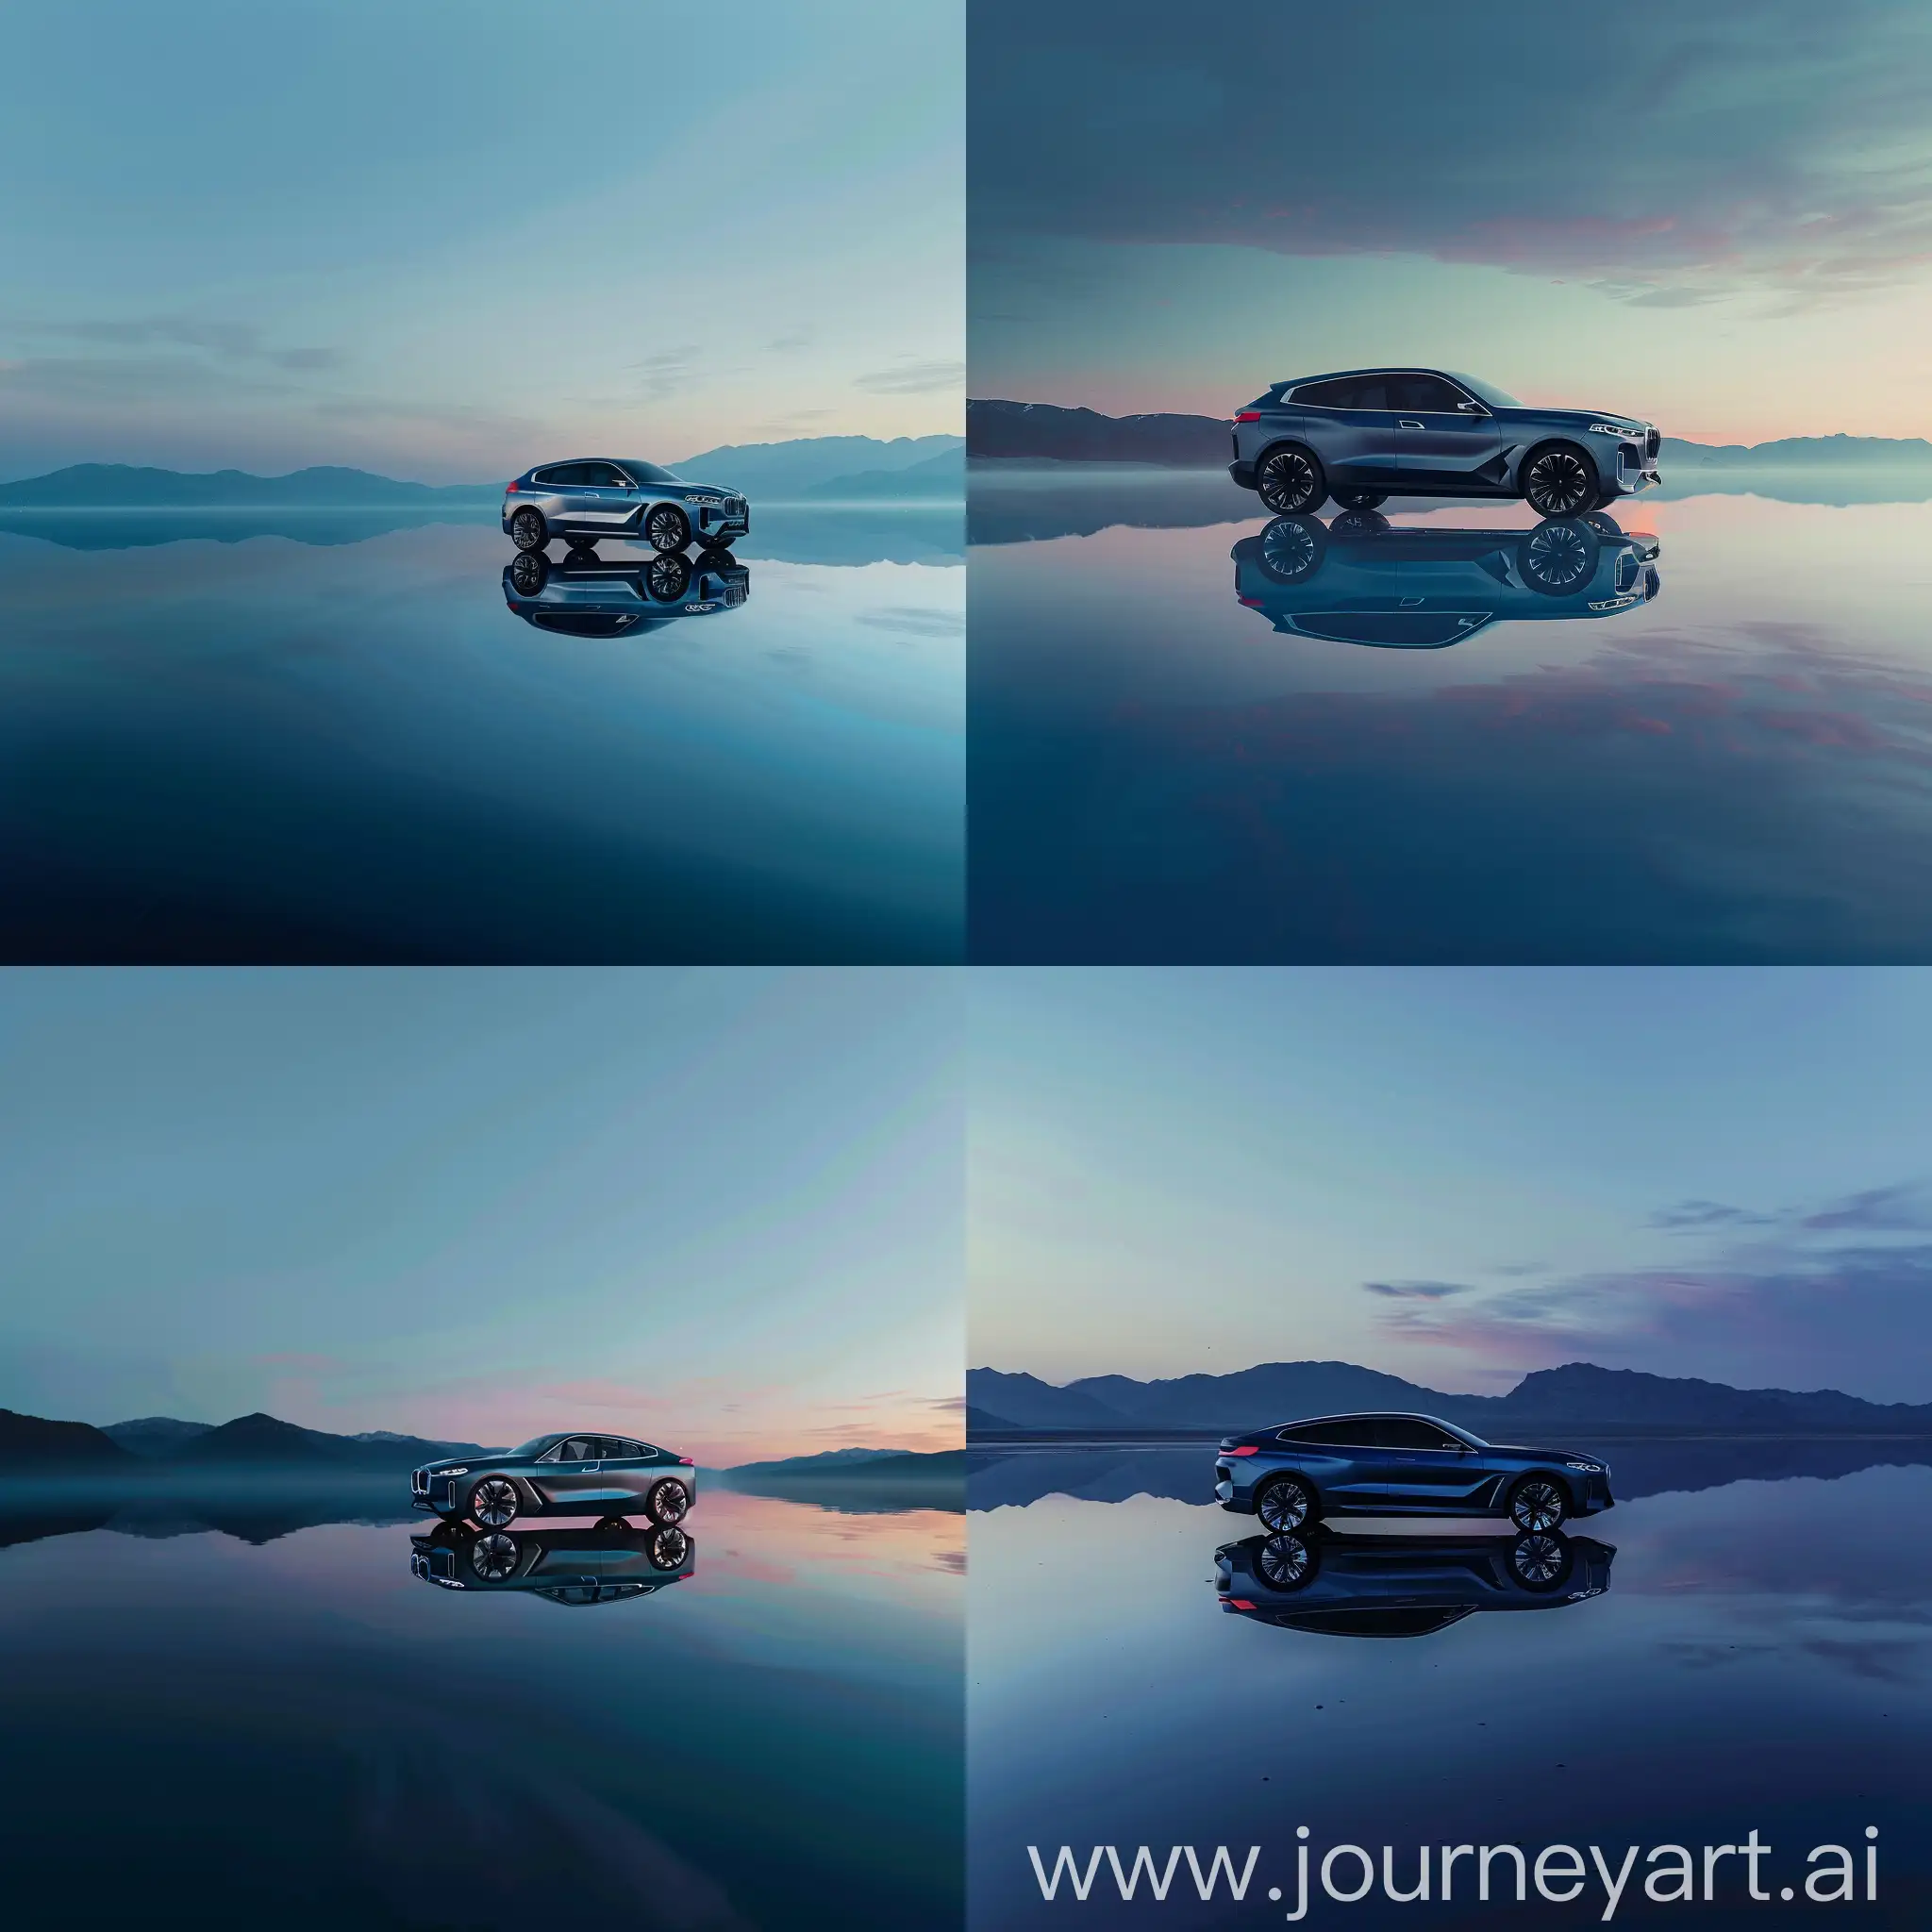 Twilight-Reflections-BMW-x8-Car-Amidst-Calm-Waters-and-Distant-Mountains